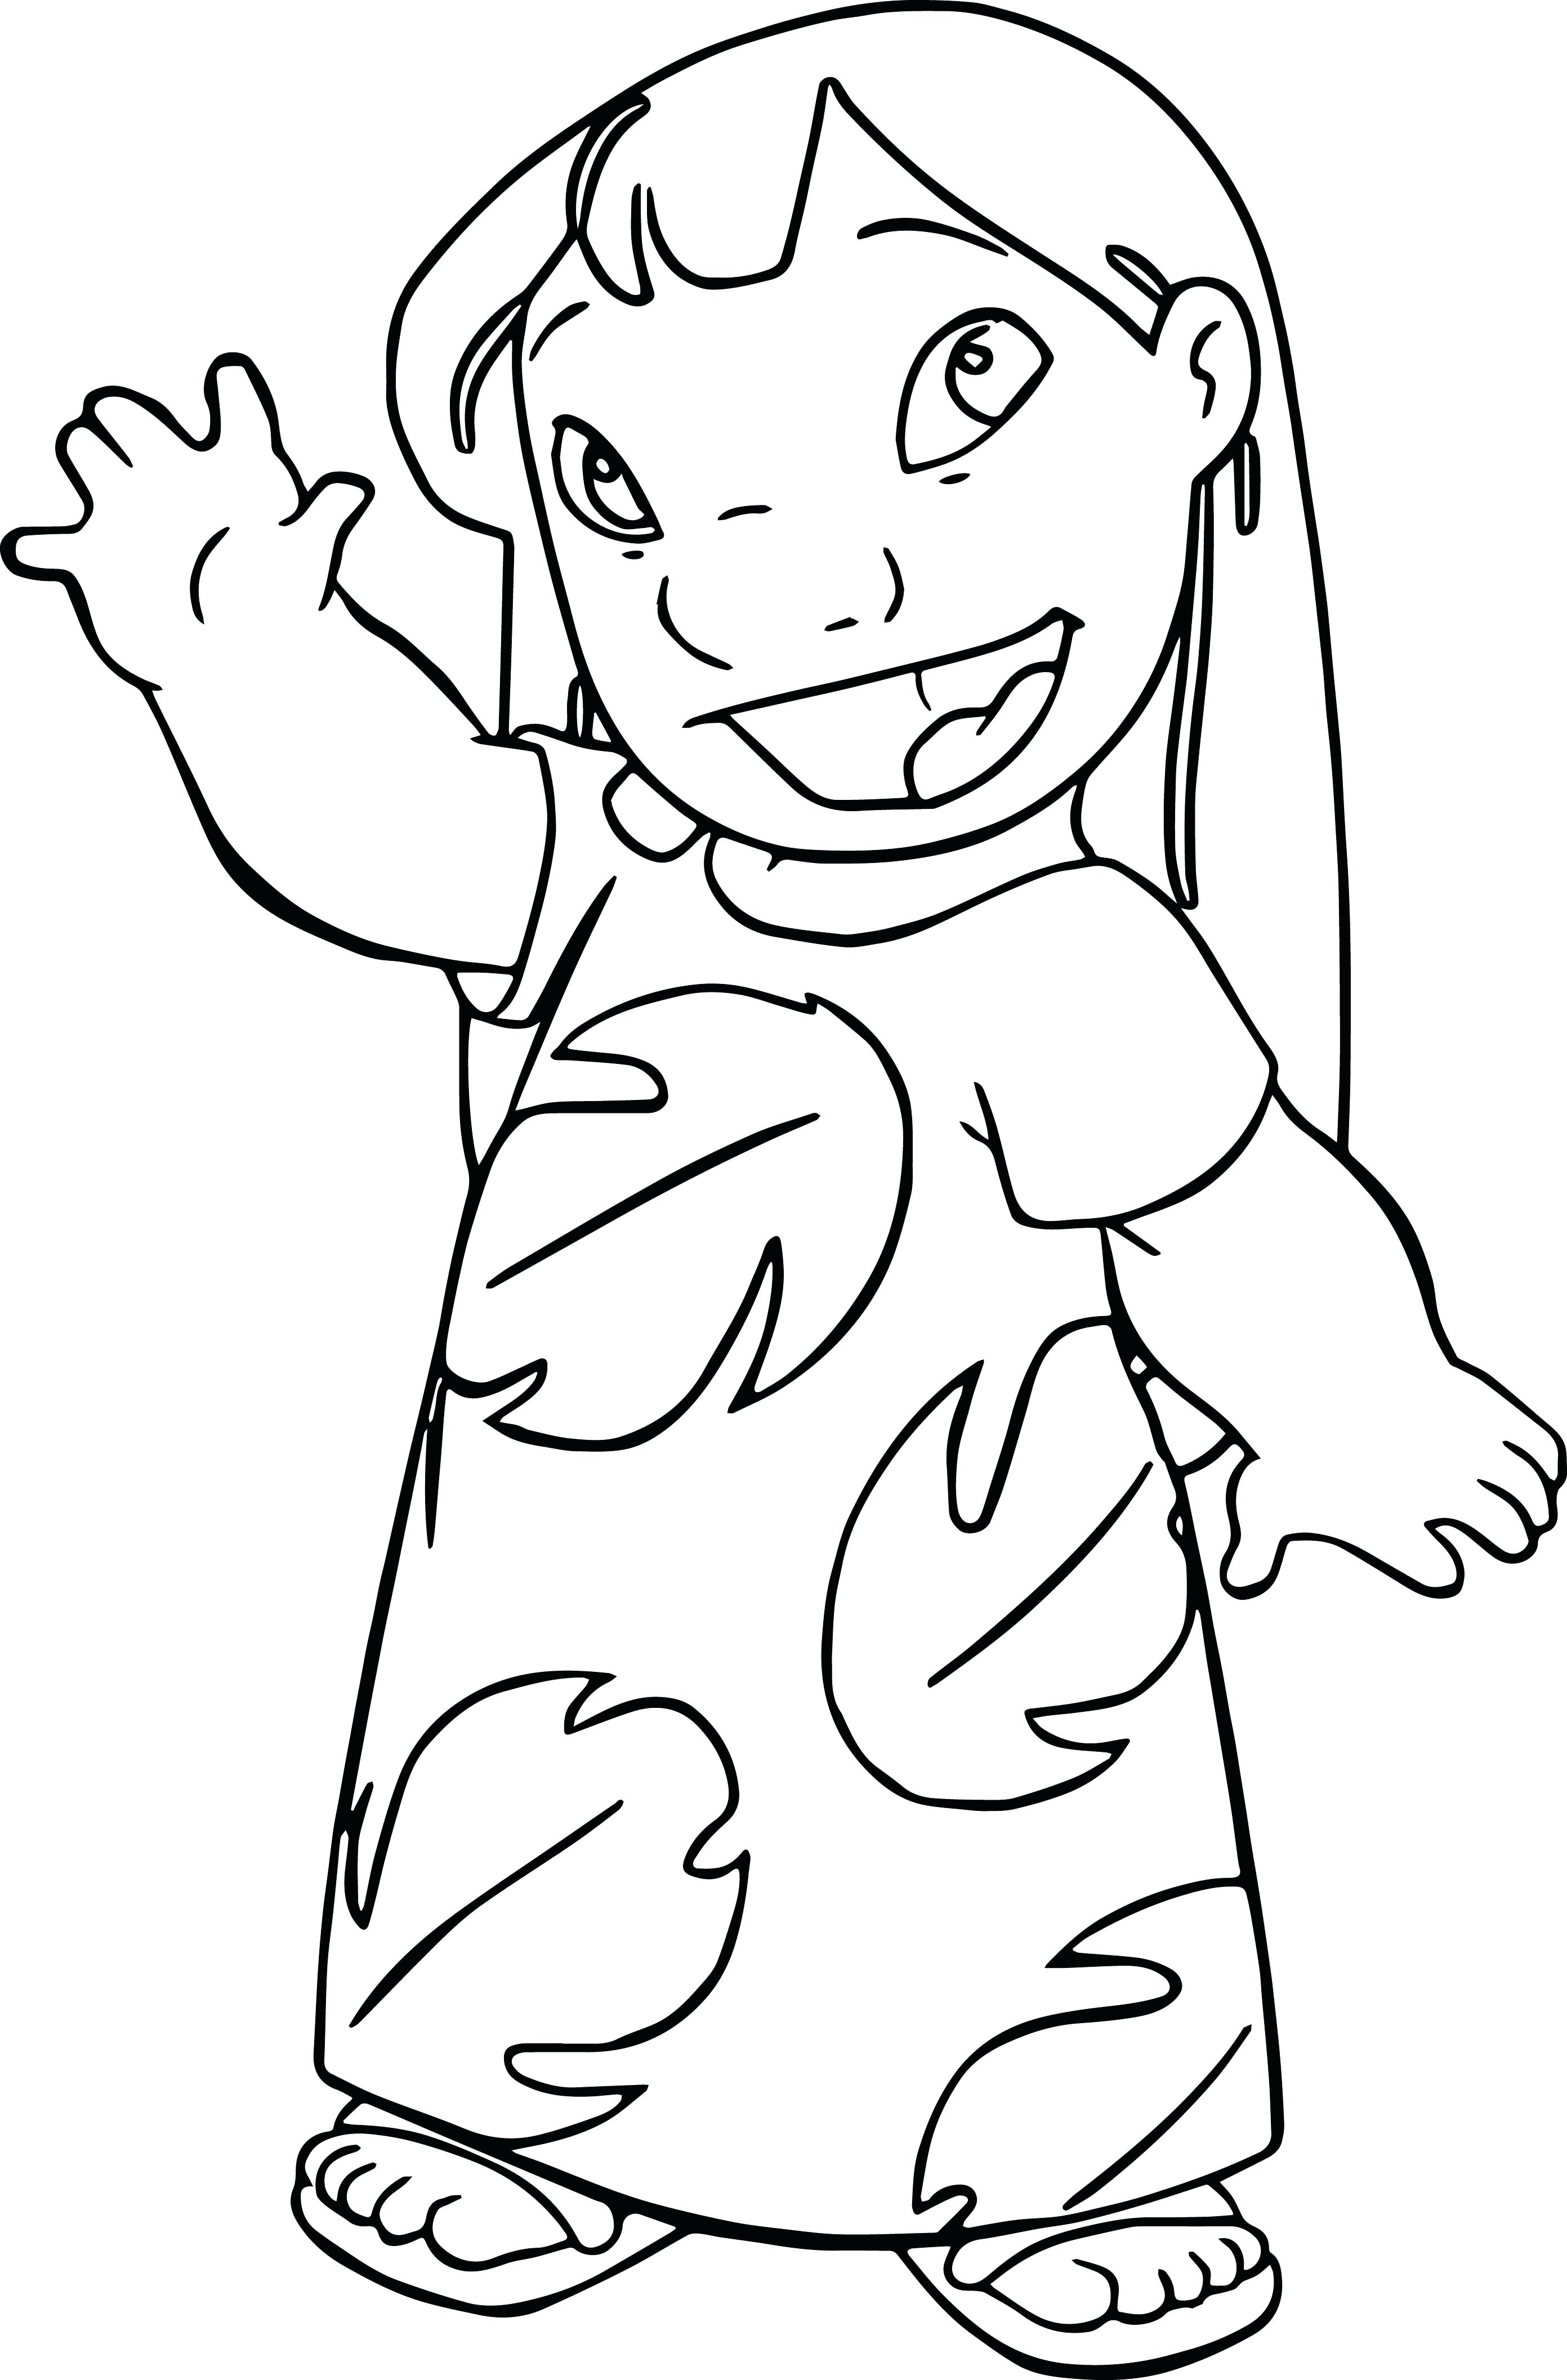 Cute Stitch Coloring Pages at GetColorings.com | Free printable ...